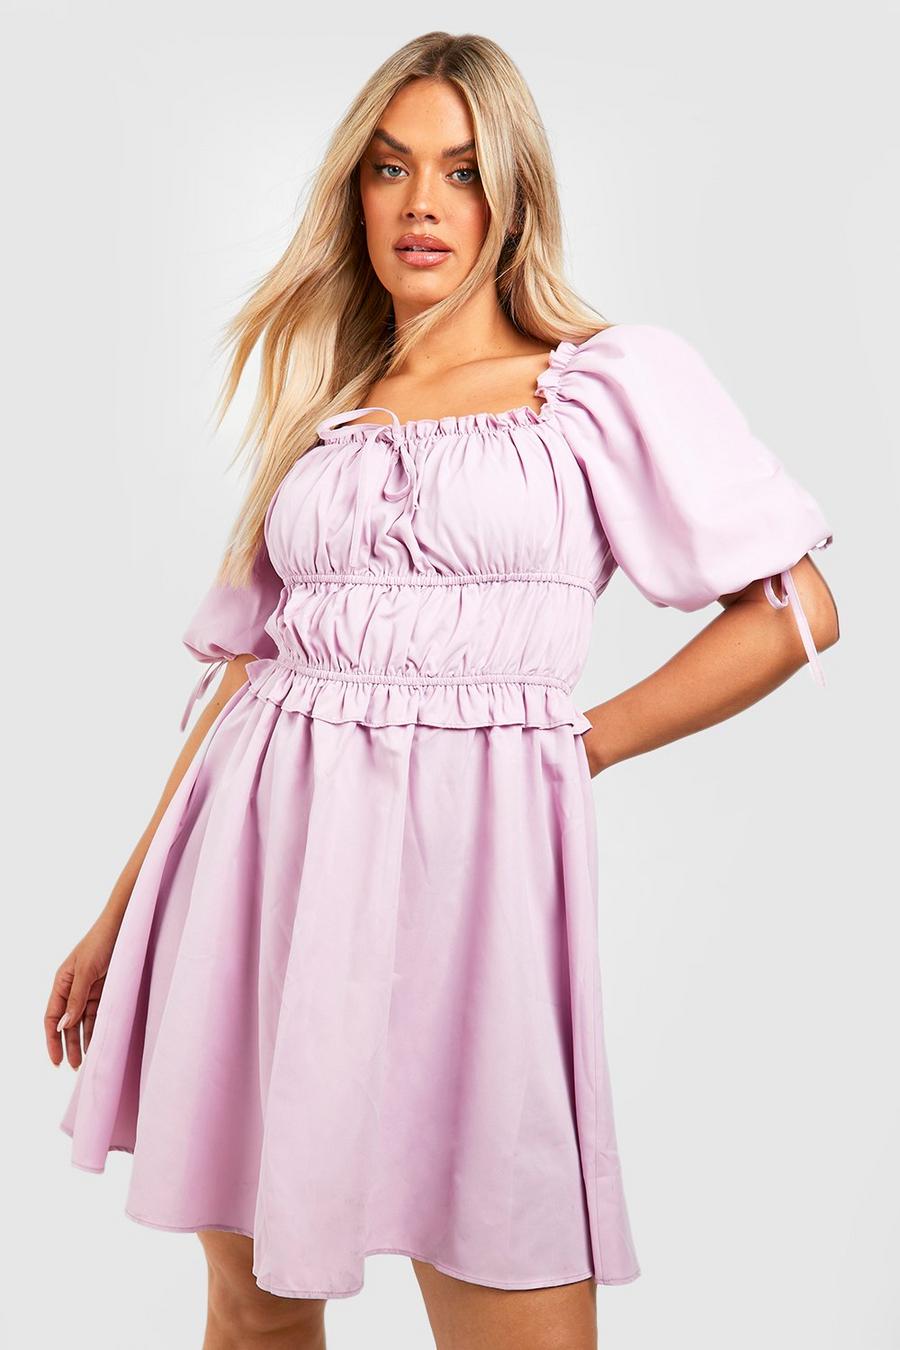 Grande taille - Robe patineuse froncée à manches bouffantes, Lilac